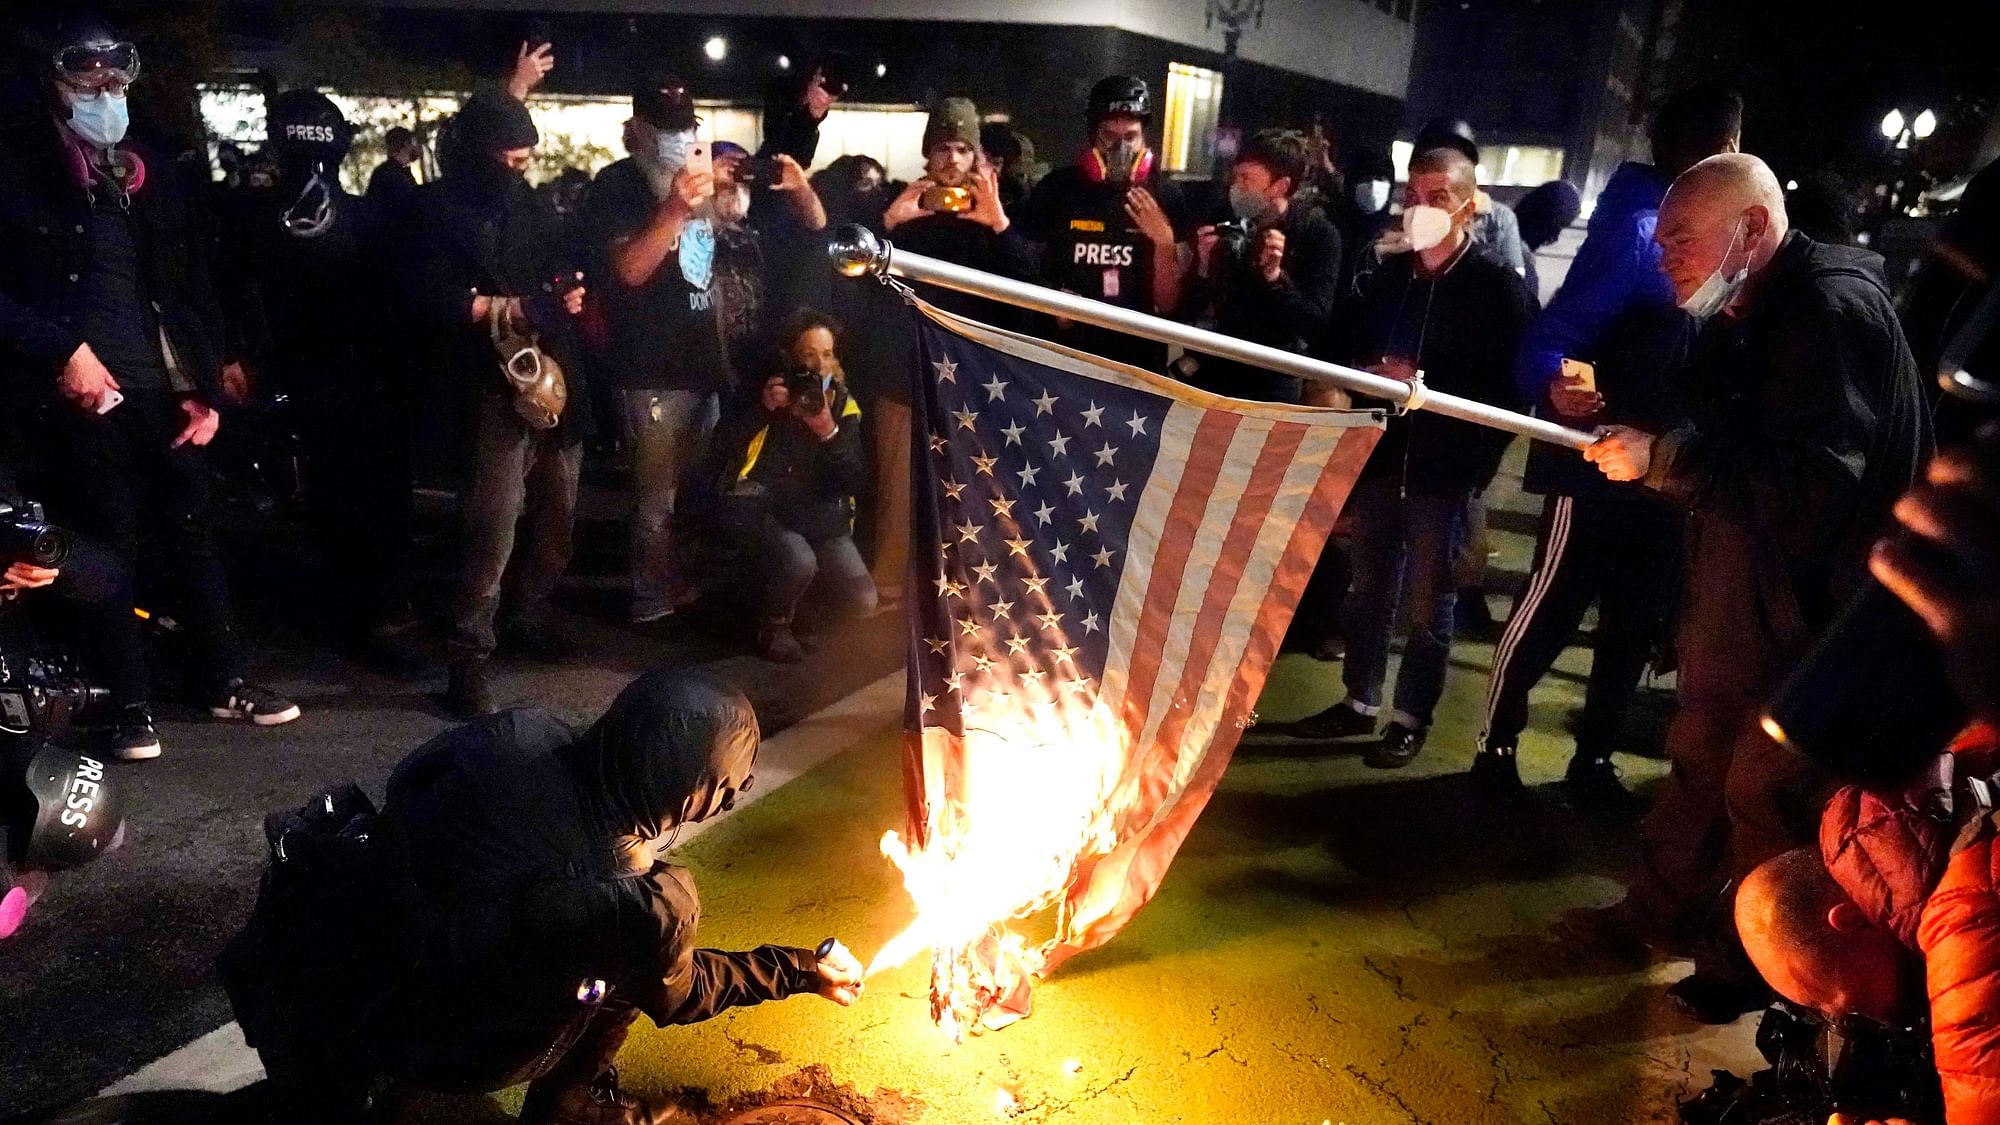 A protester lights an American flag on fire during a demonstration Wednesday, Nov. 4, 2020, in Portland.